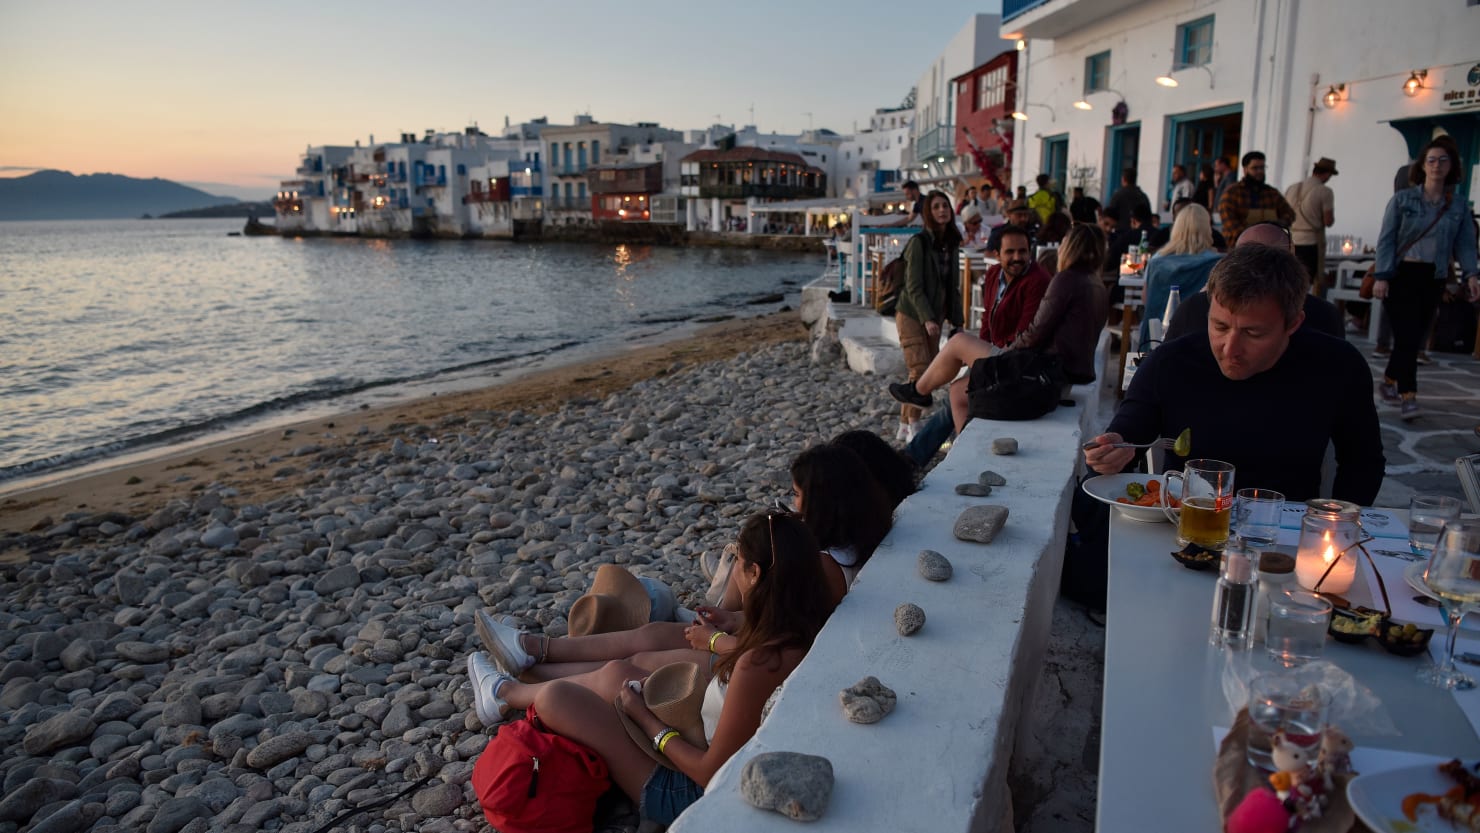 On Mykonos, Greece’s Famed Party Island, ‘Everyone Is About to Explode’